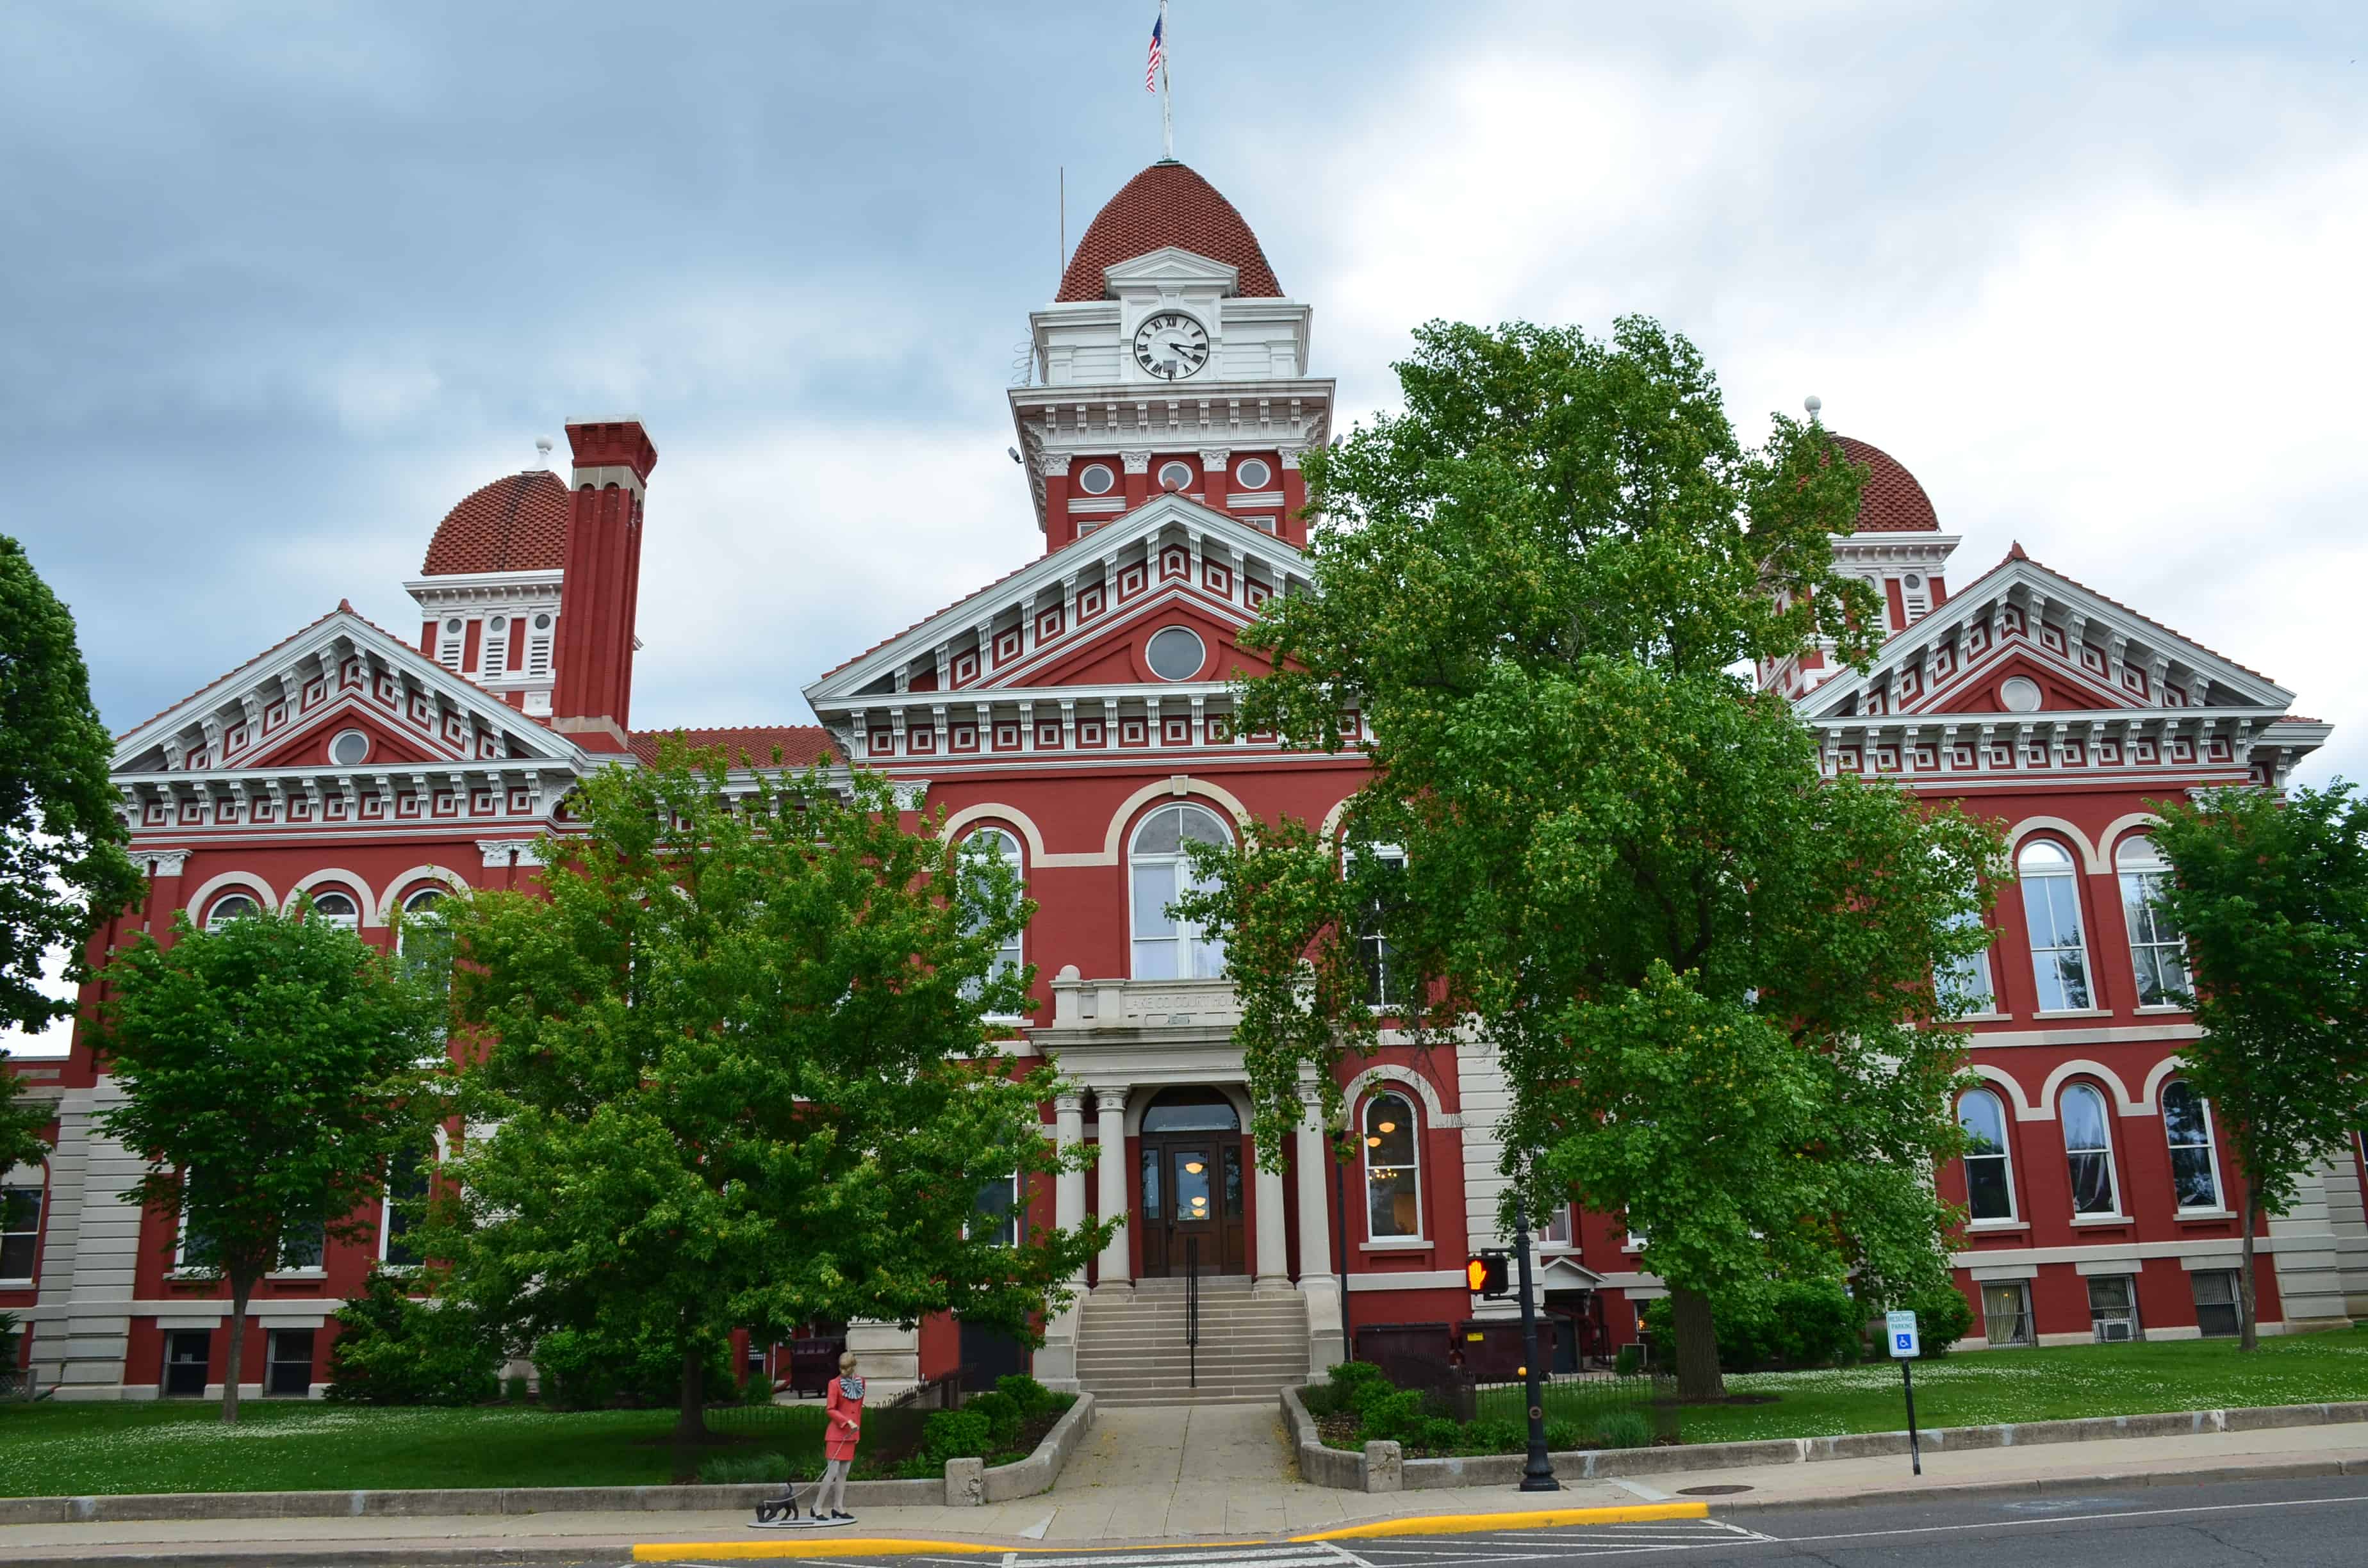 Lake County Courthouse in Crown Point, Indiana